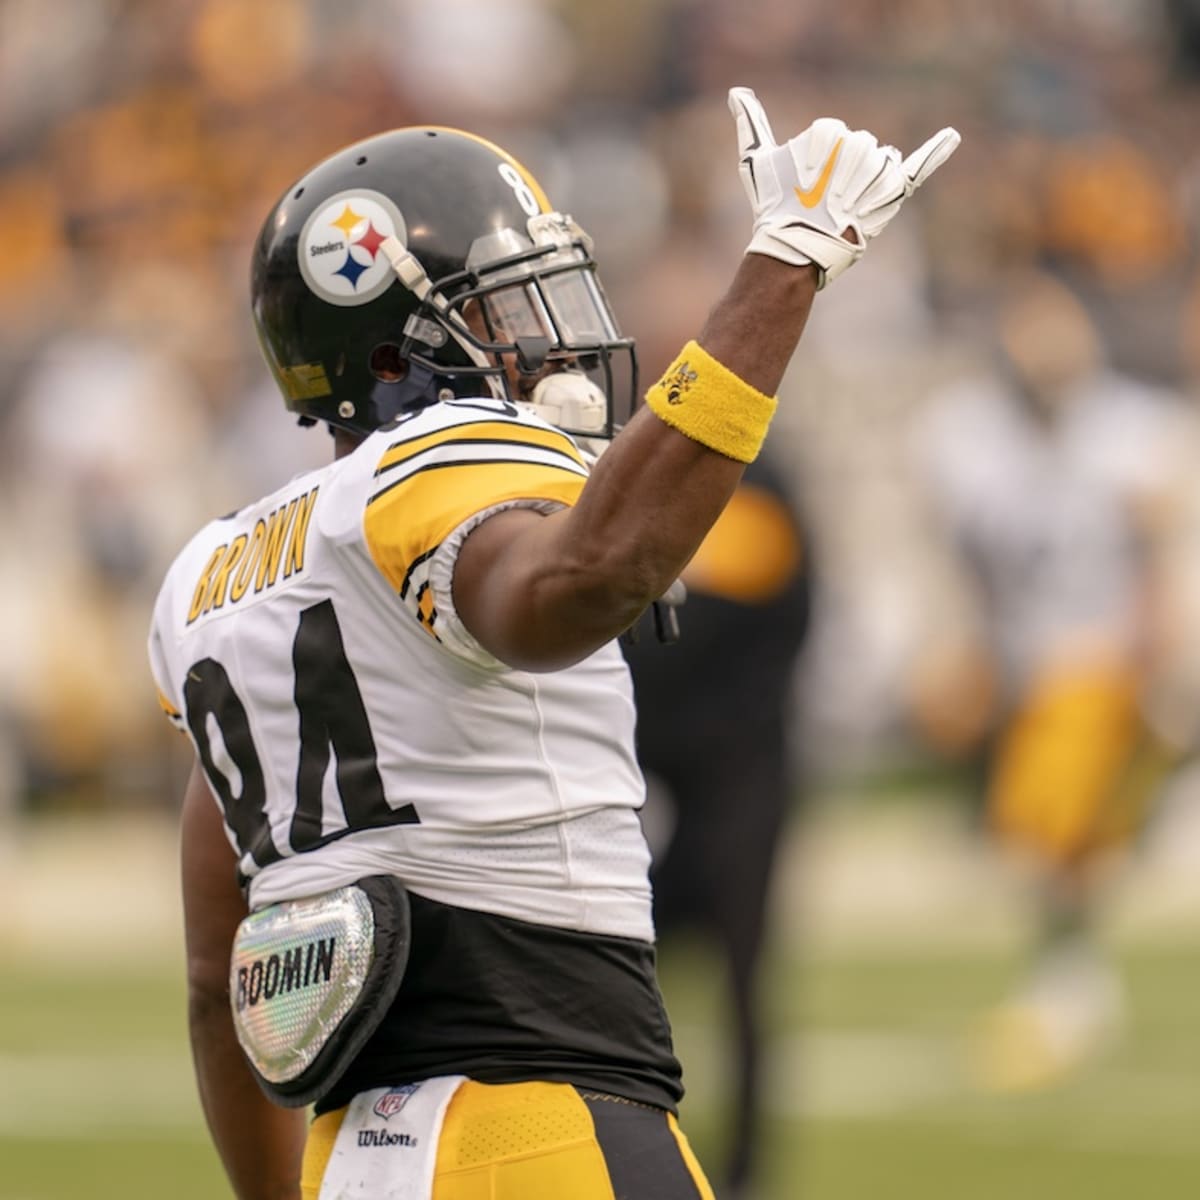 Antonio Brown: Former Pittsburgh Steelers wide receiver announces  retirement from NFL again, NFL News